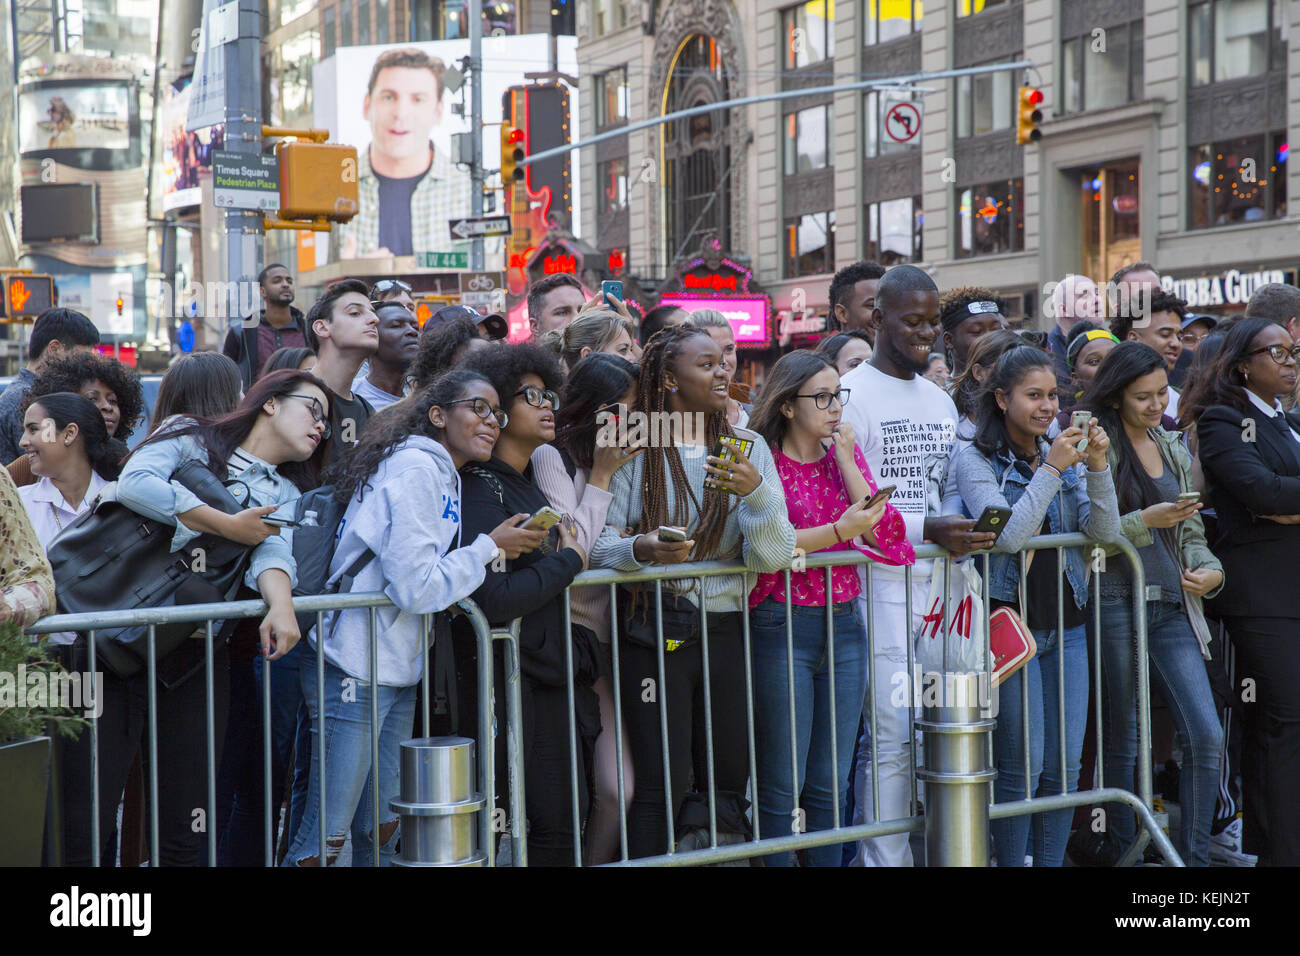 Young people & tourists stand behind barricades in Times Square to get a look at celebrity singers performing on the outdoor stage there. New York City. Stock Photo